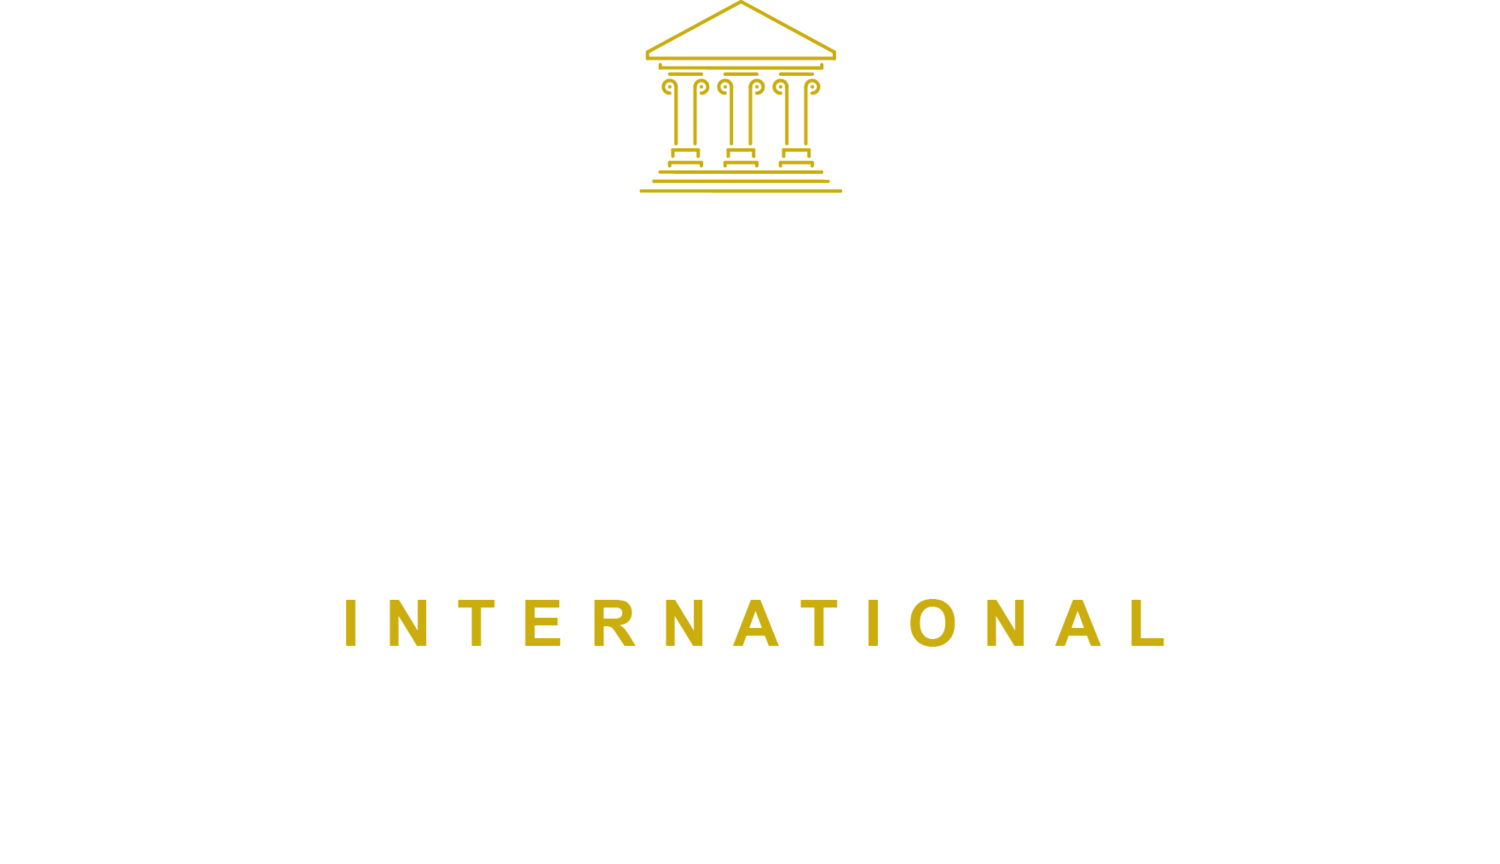 Mayfair Private Wealth